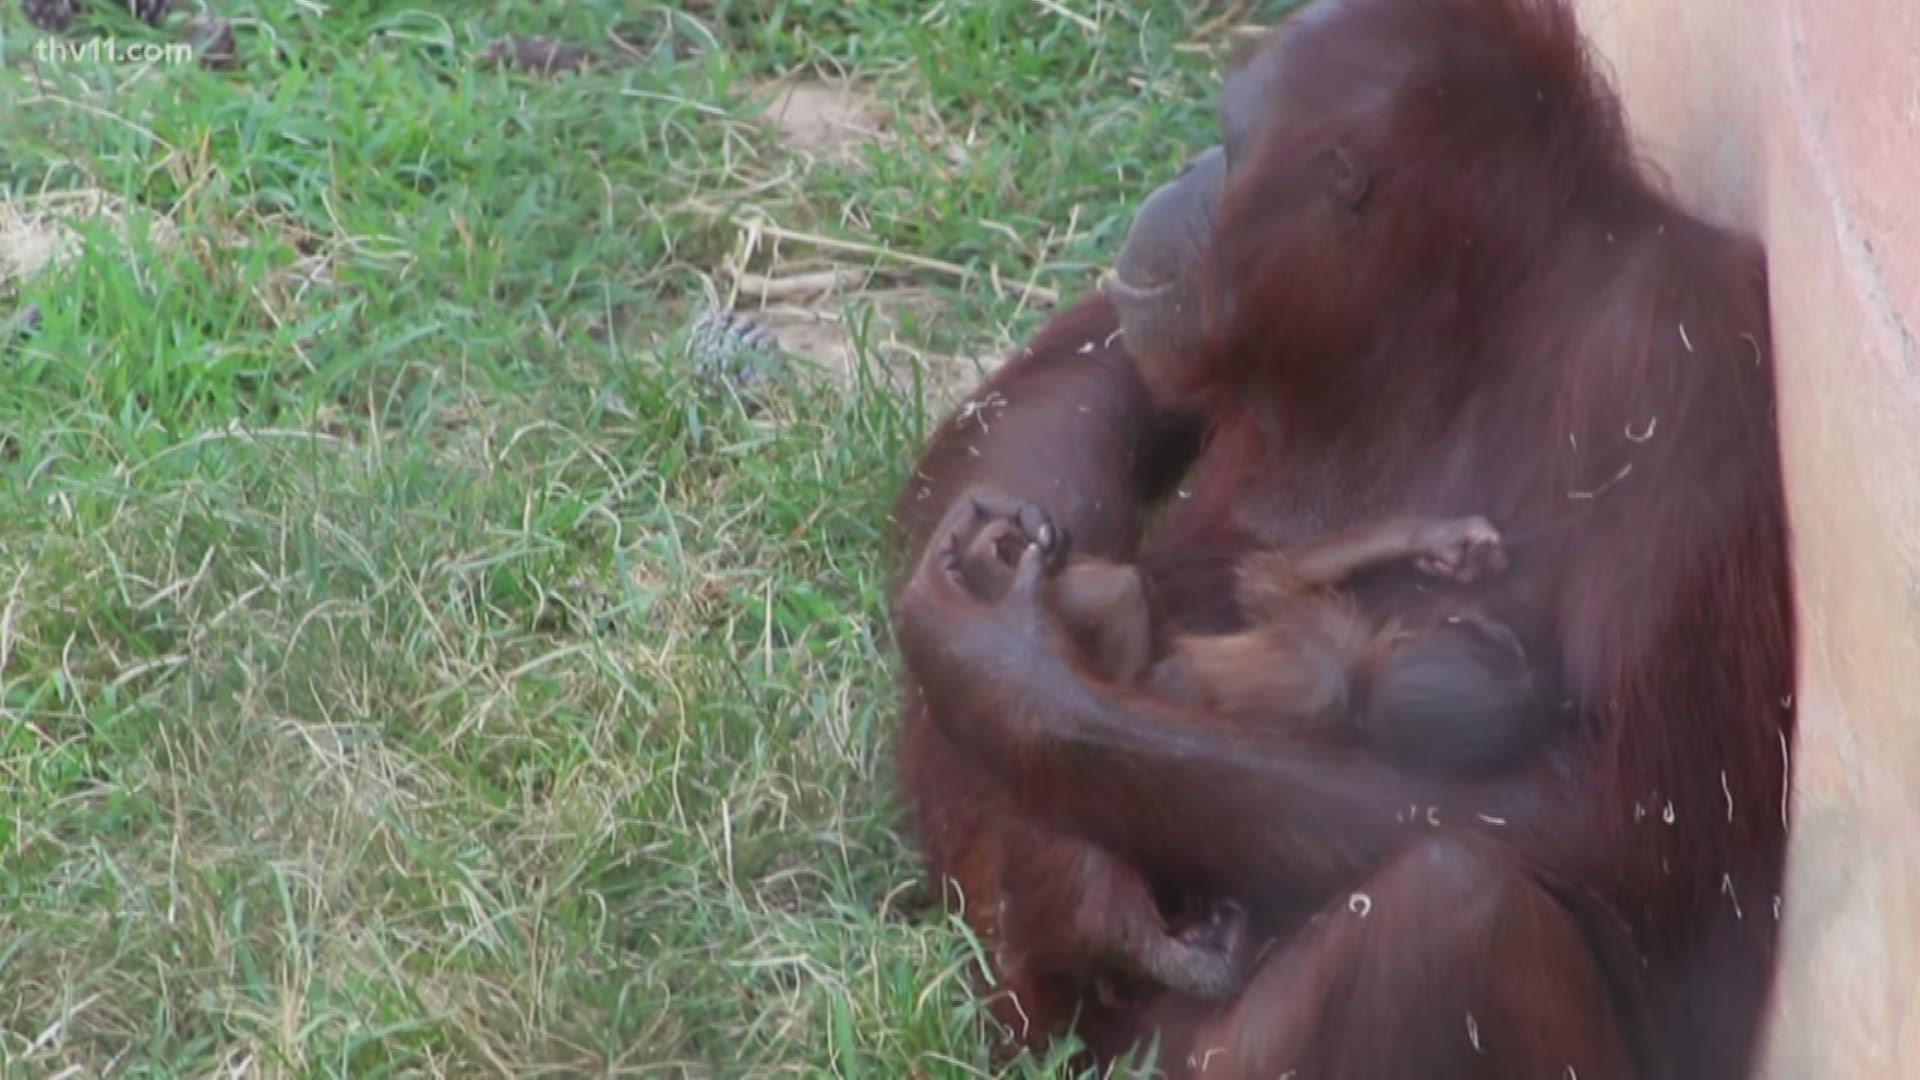 Check this out! A new baby at the Little Rock Zoo!